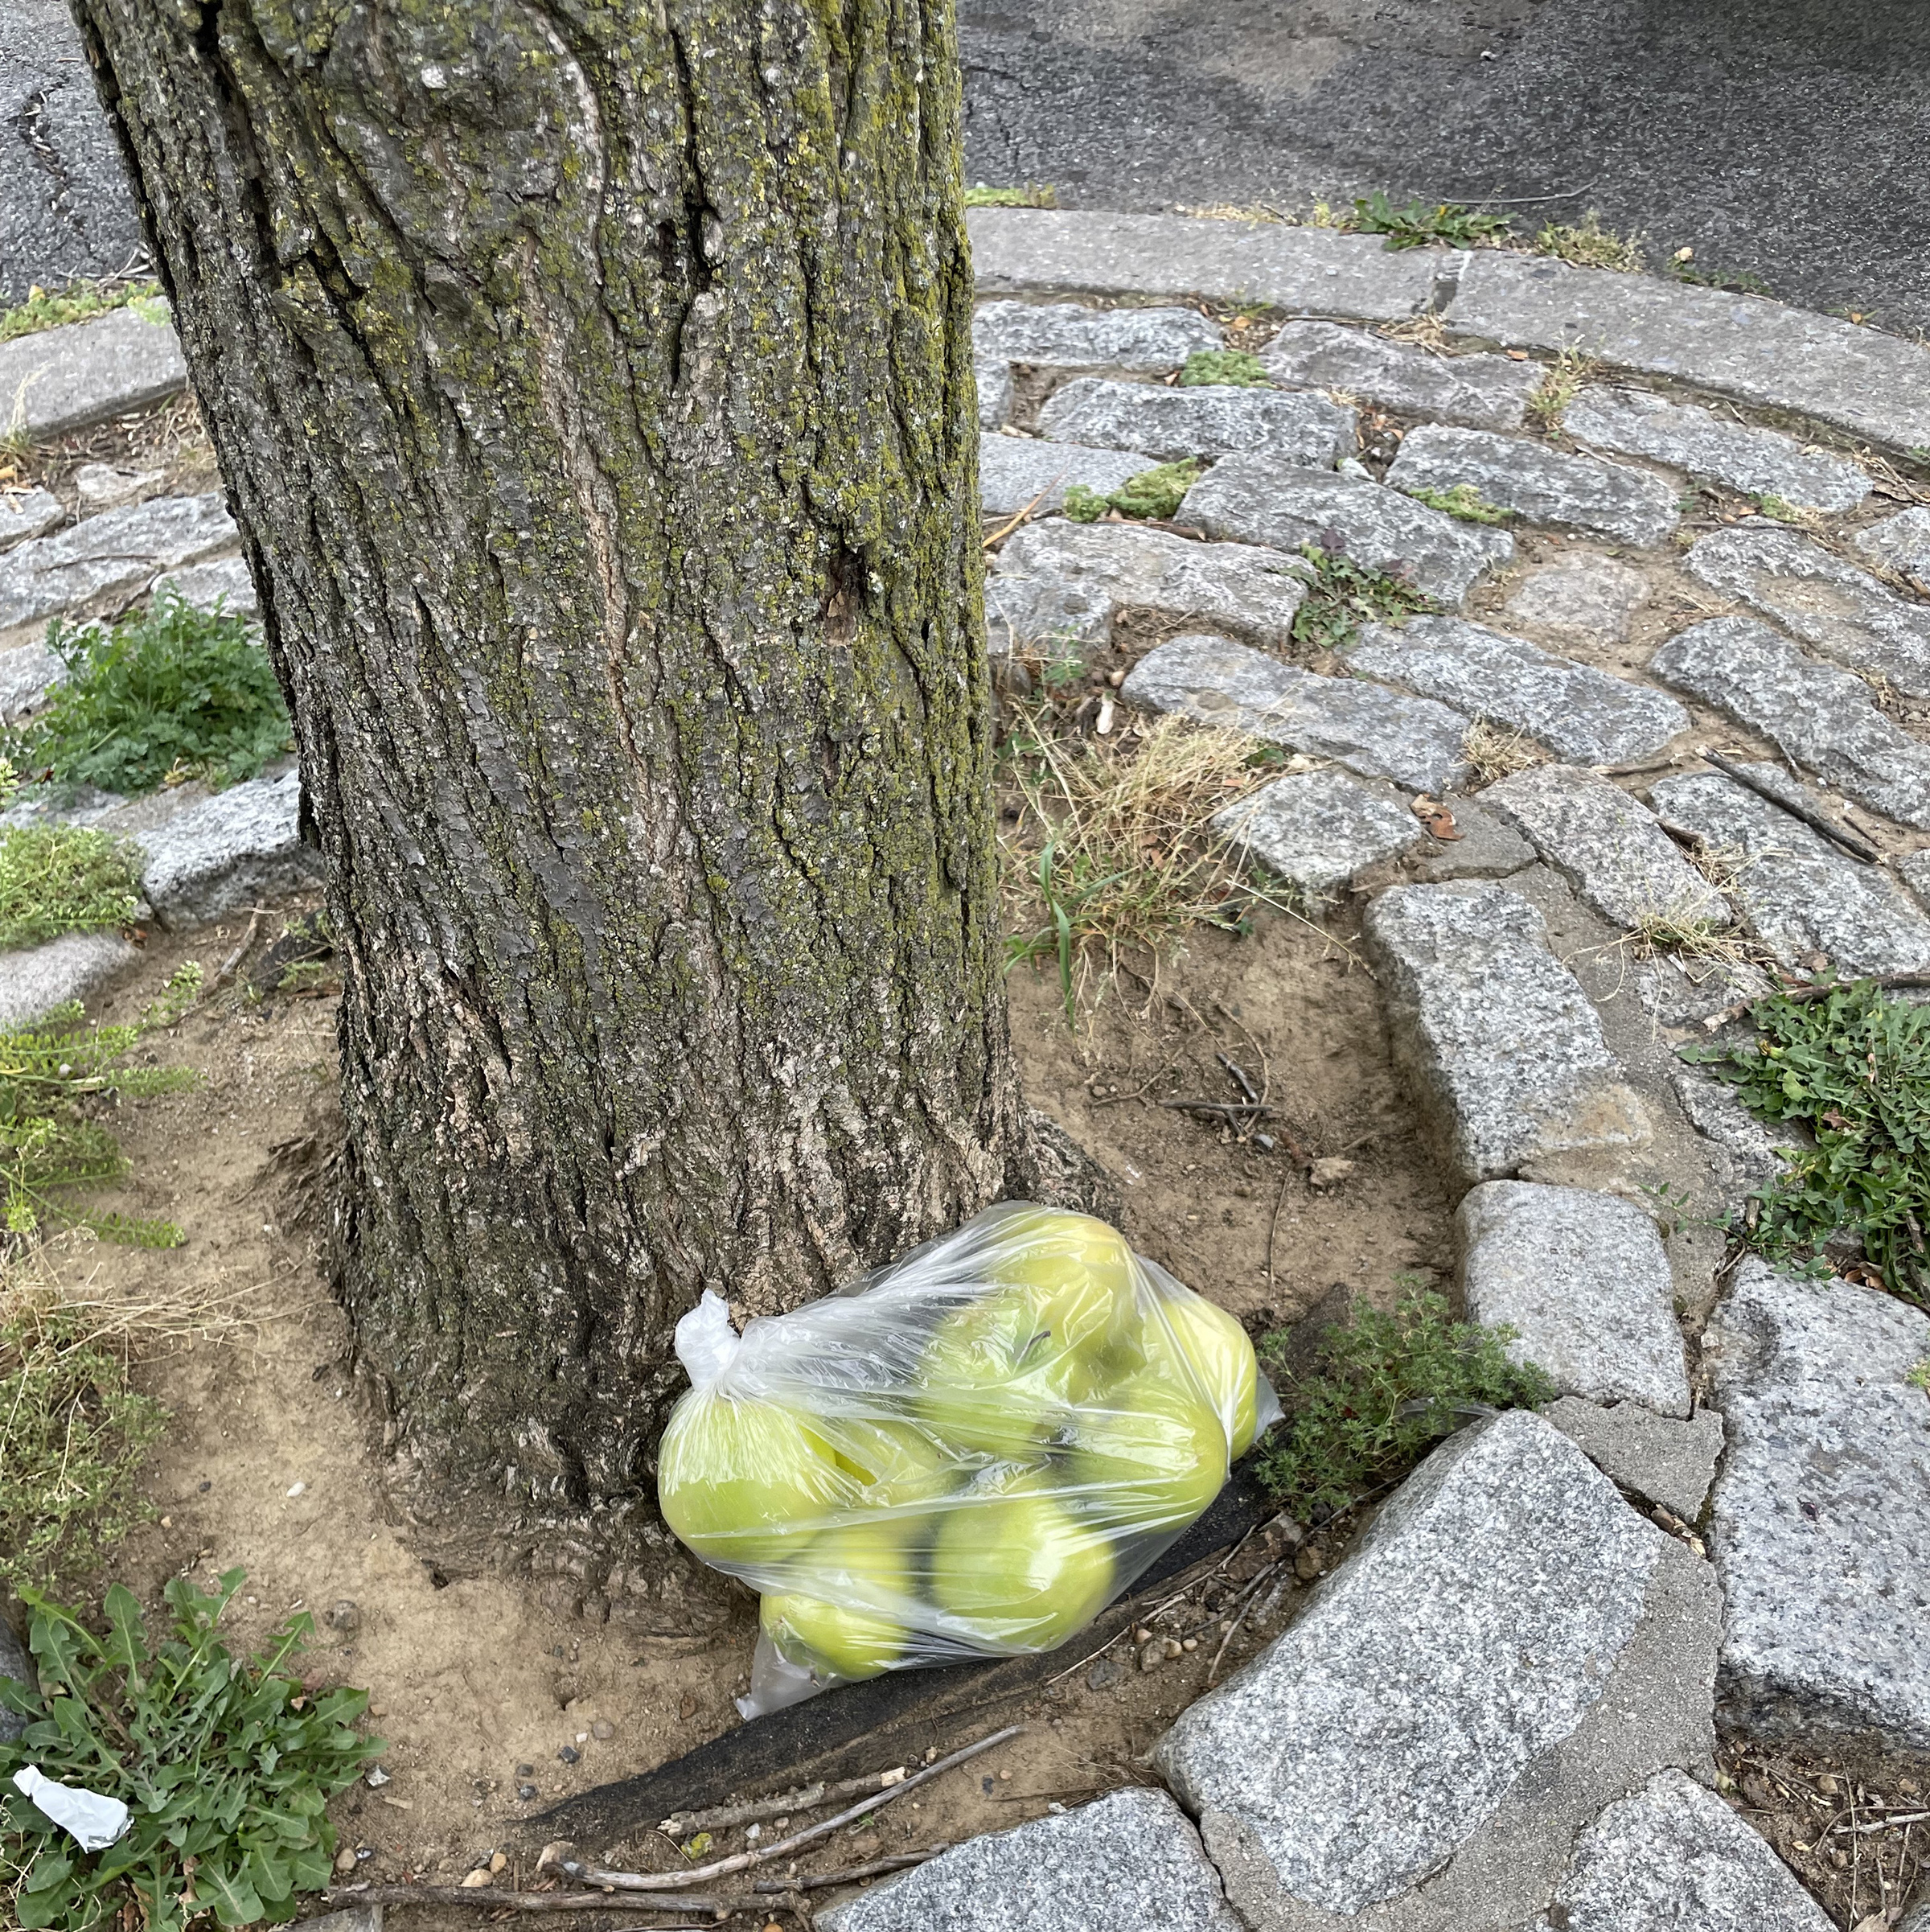 photo of bag of apples at foot of a tree